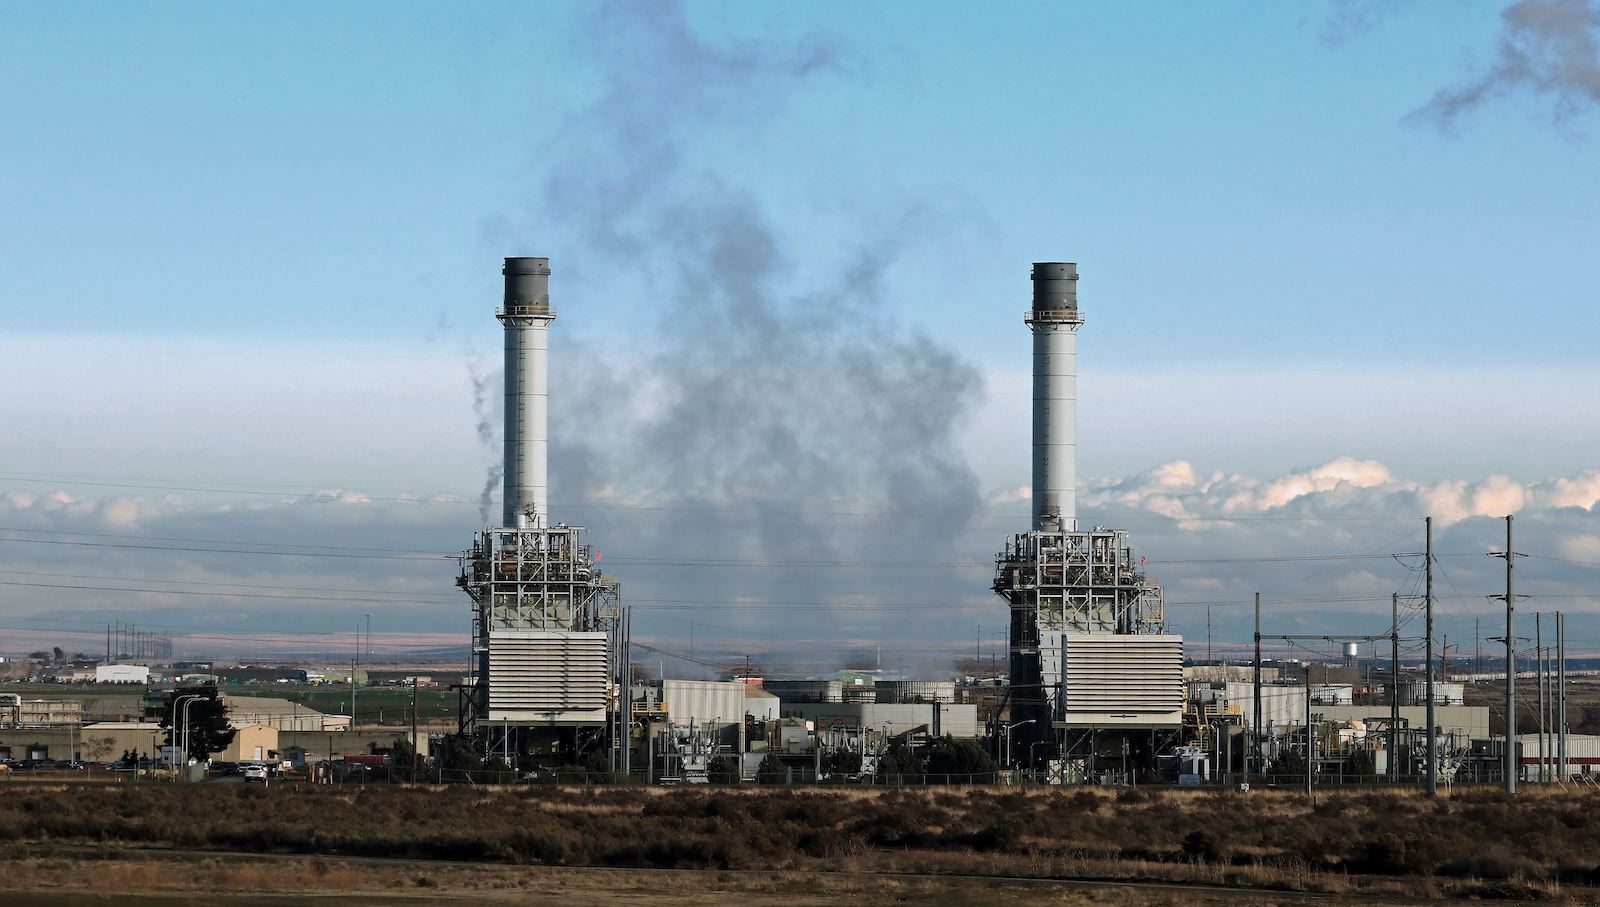 Natural gas fueled electricity generating power plant near Hermiston Oregon. (Photo by: Education Images/Universal Images Group via Getty Images)